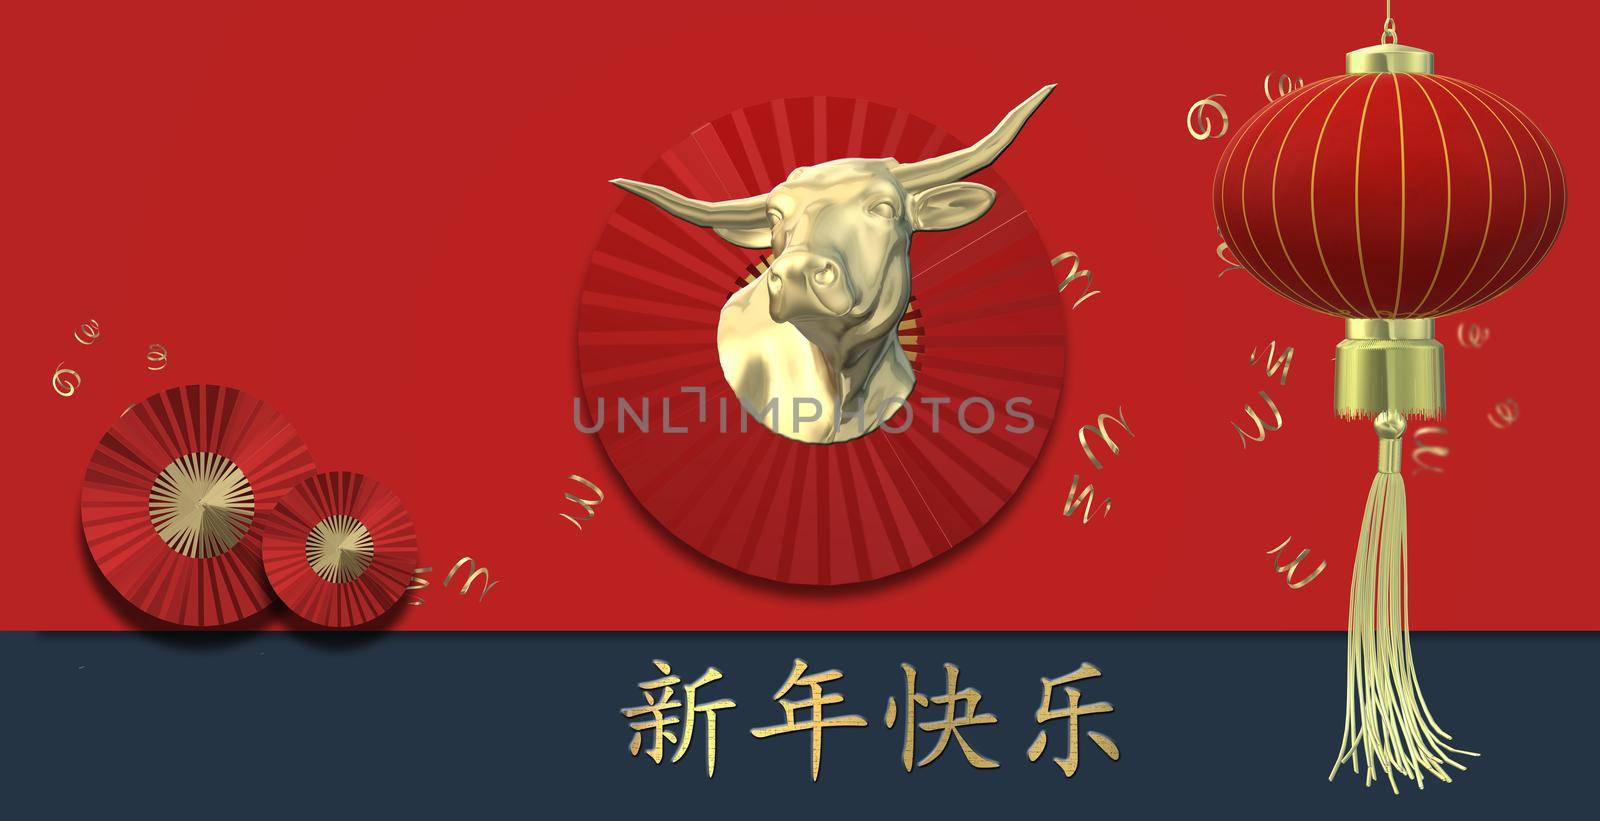 2021 Chinese new year, gold ox, digit 2021, lantern, fans on red background. Gold text Chinese translation Happy New Year. Design for oriental 2021 new year card. 3D rendering